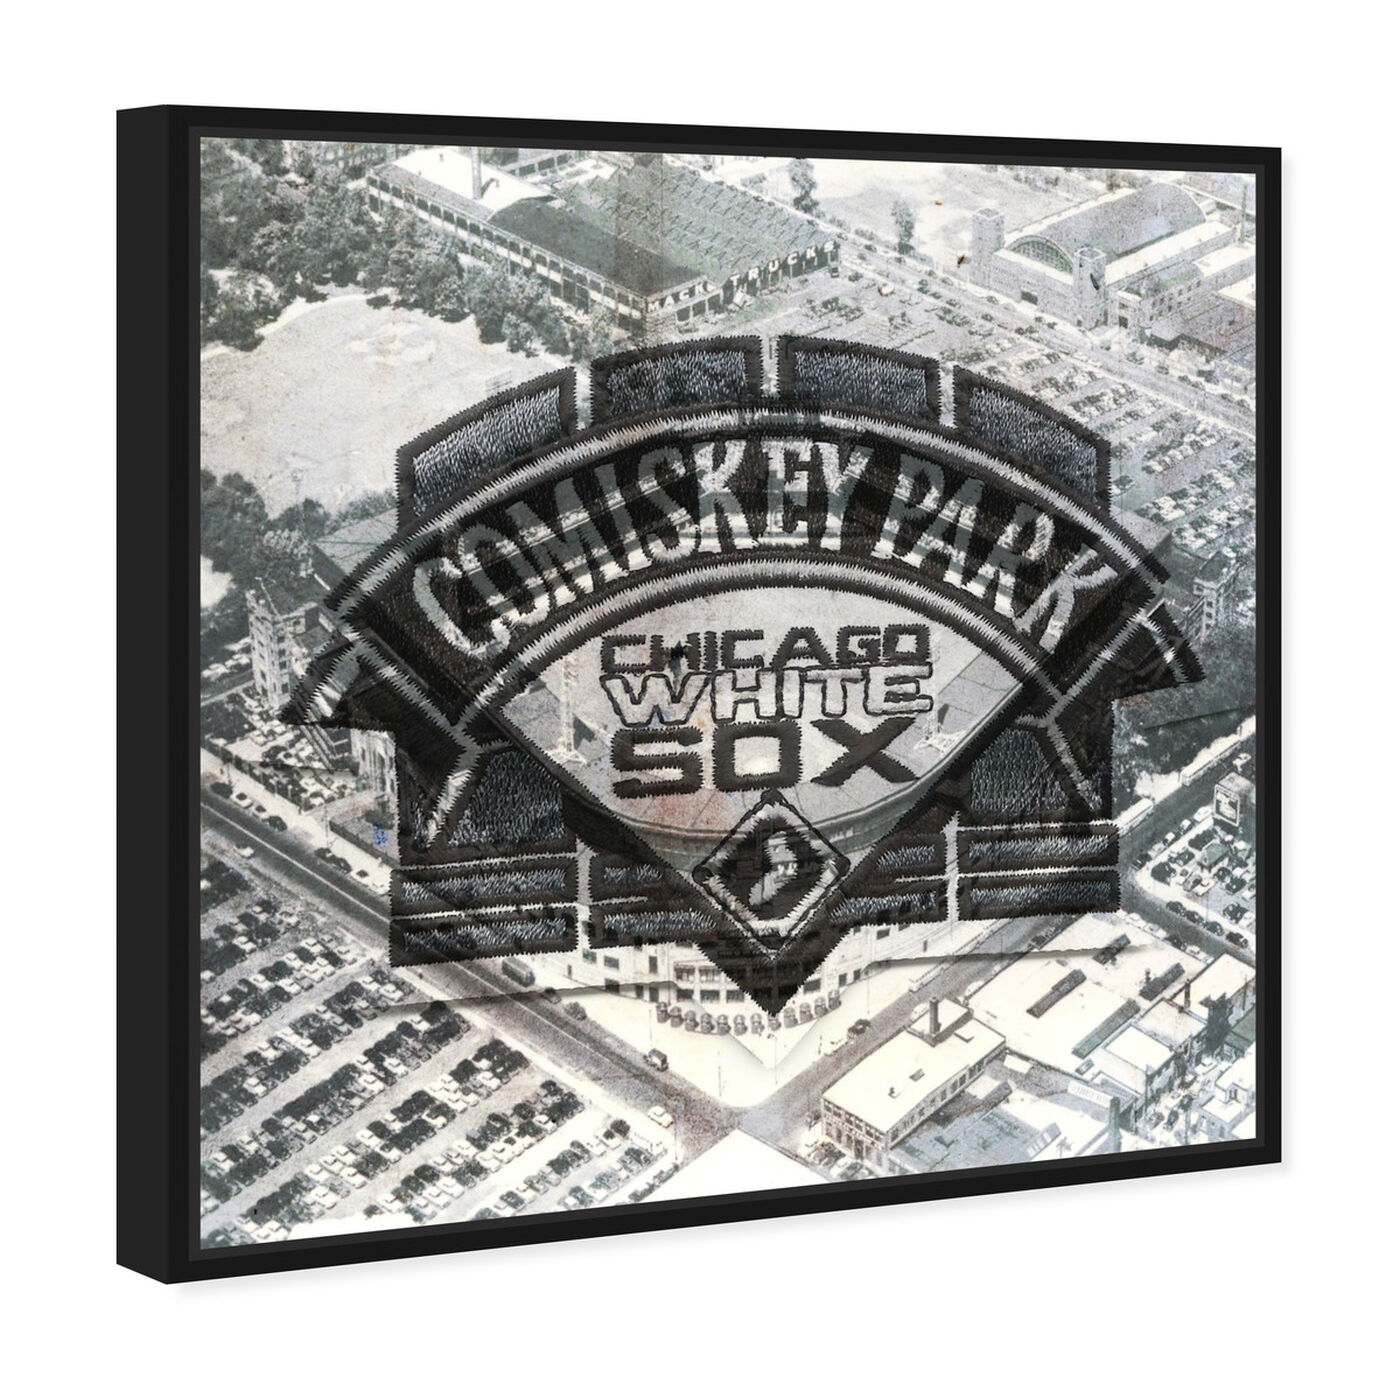 Angled view of Comiskey Park White Sox featuring cities and skylines and united states cities art.